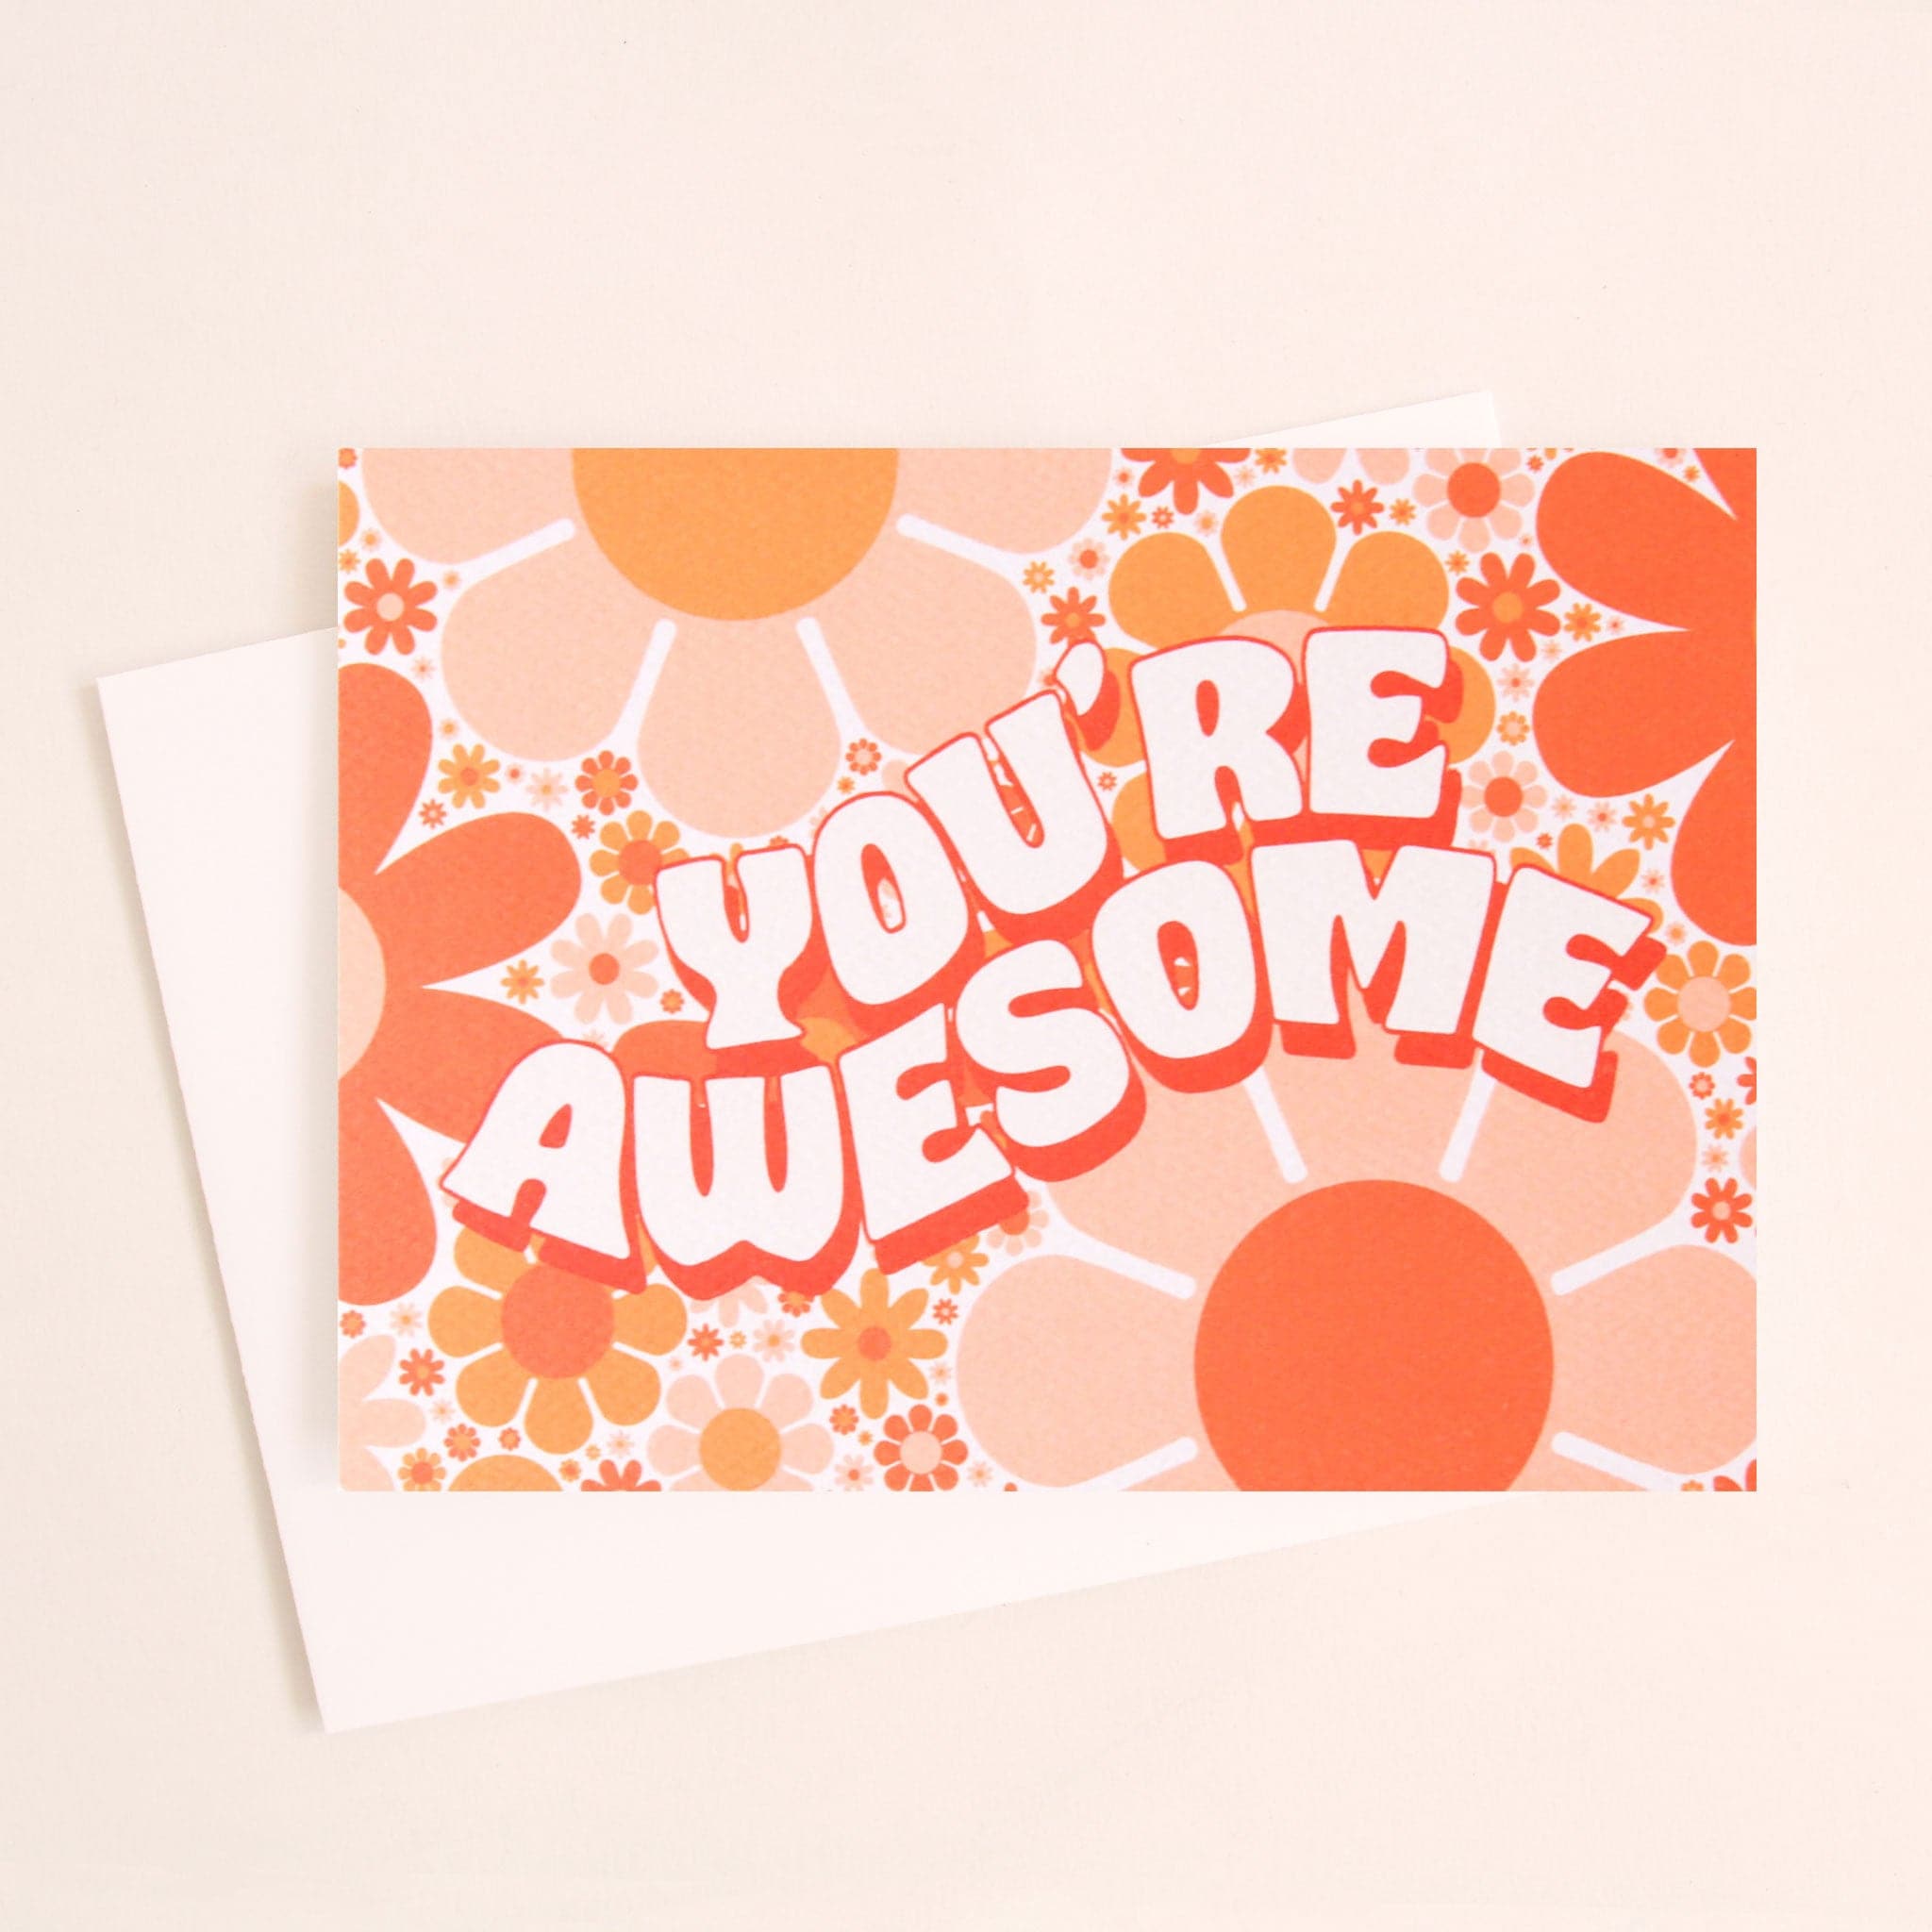 Card filled with orange and pink retro flower design. The car dreads 'you're awesome' in white curved bubble lettering with tangerine orange shadow detailing. 